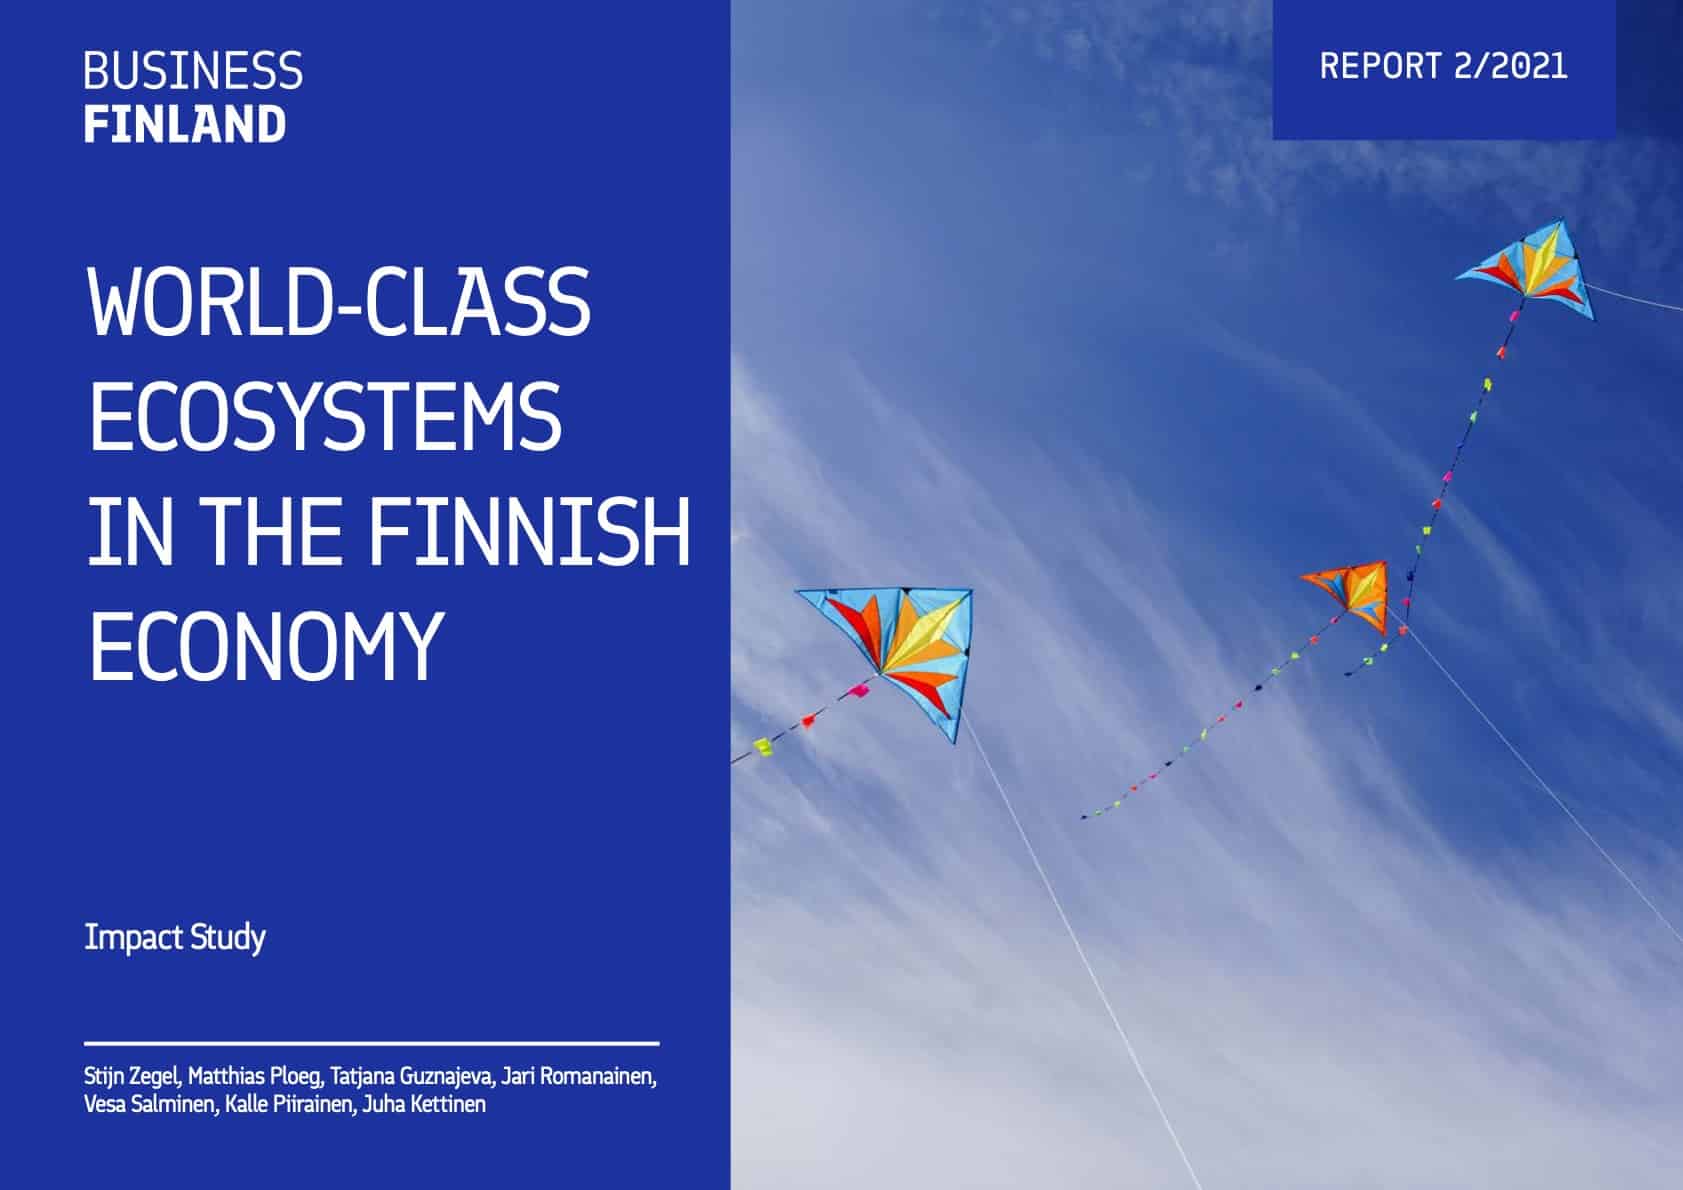 World-class ecosystems in the Finnish economy